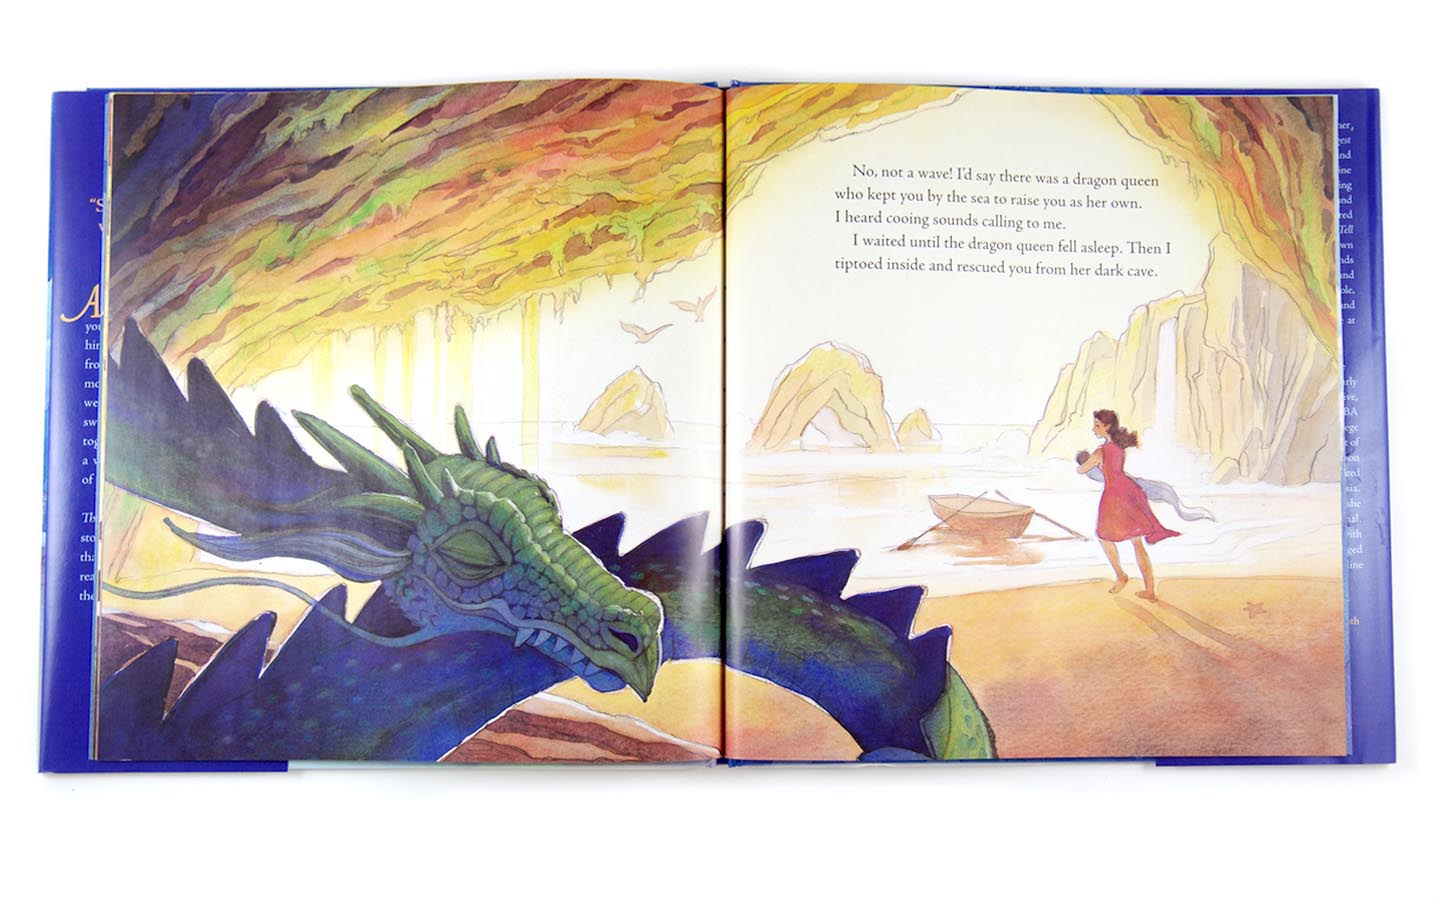 Photograph of The Story I'll Tell book, open to a page showing a large sleeping dragon. In the background, a mother runs with a baby in her arms toward a small rowboat.